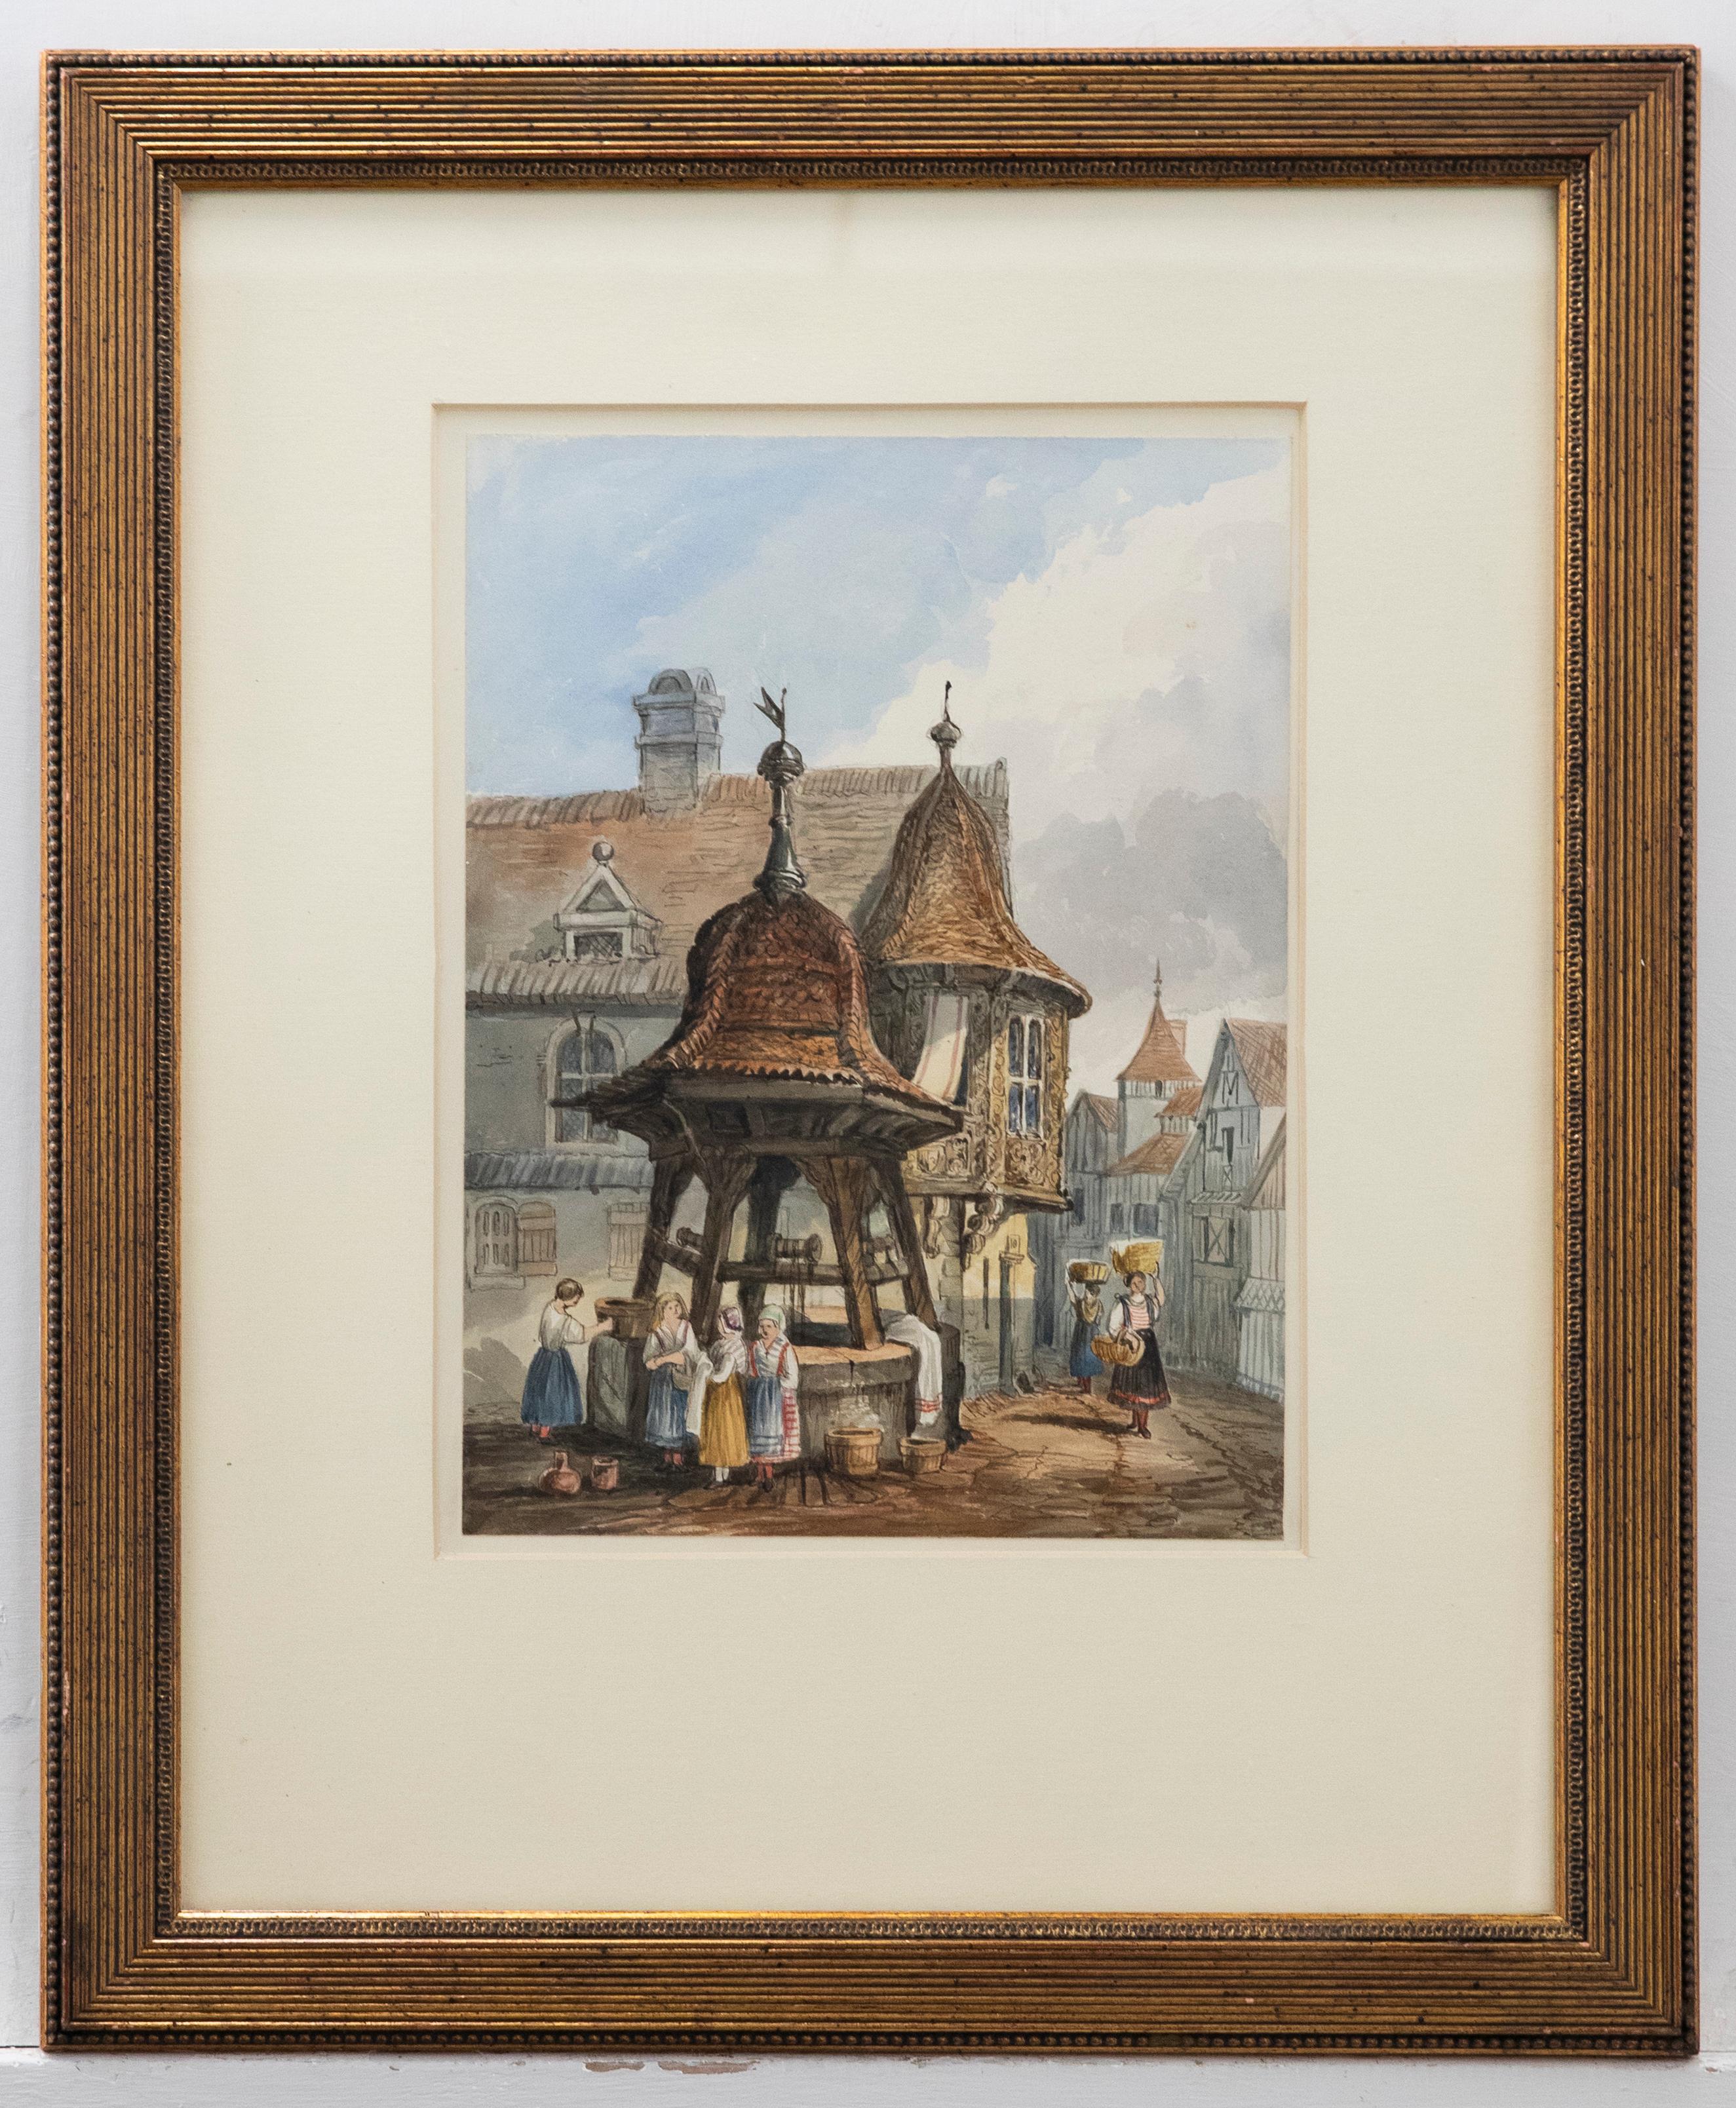 Unknown Landscape Art - Framed 19th Century Watercolour - At The Town Well